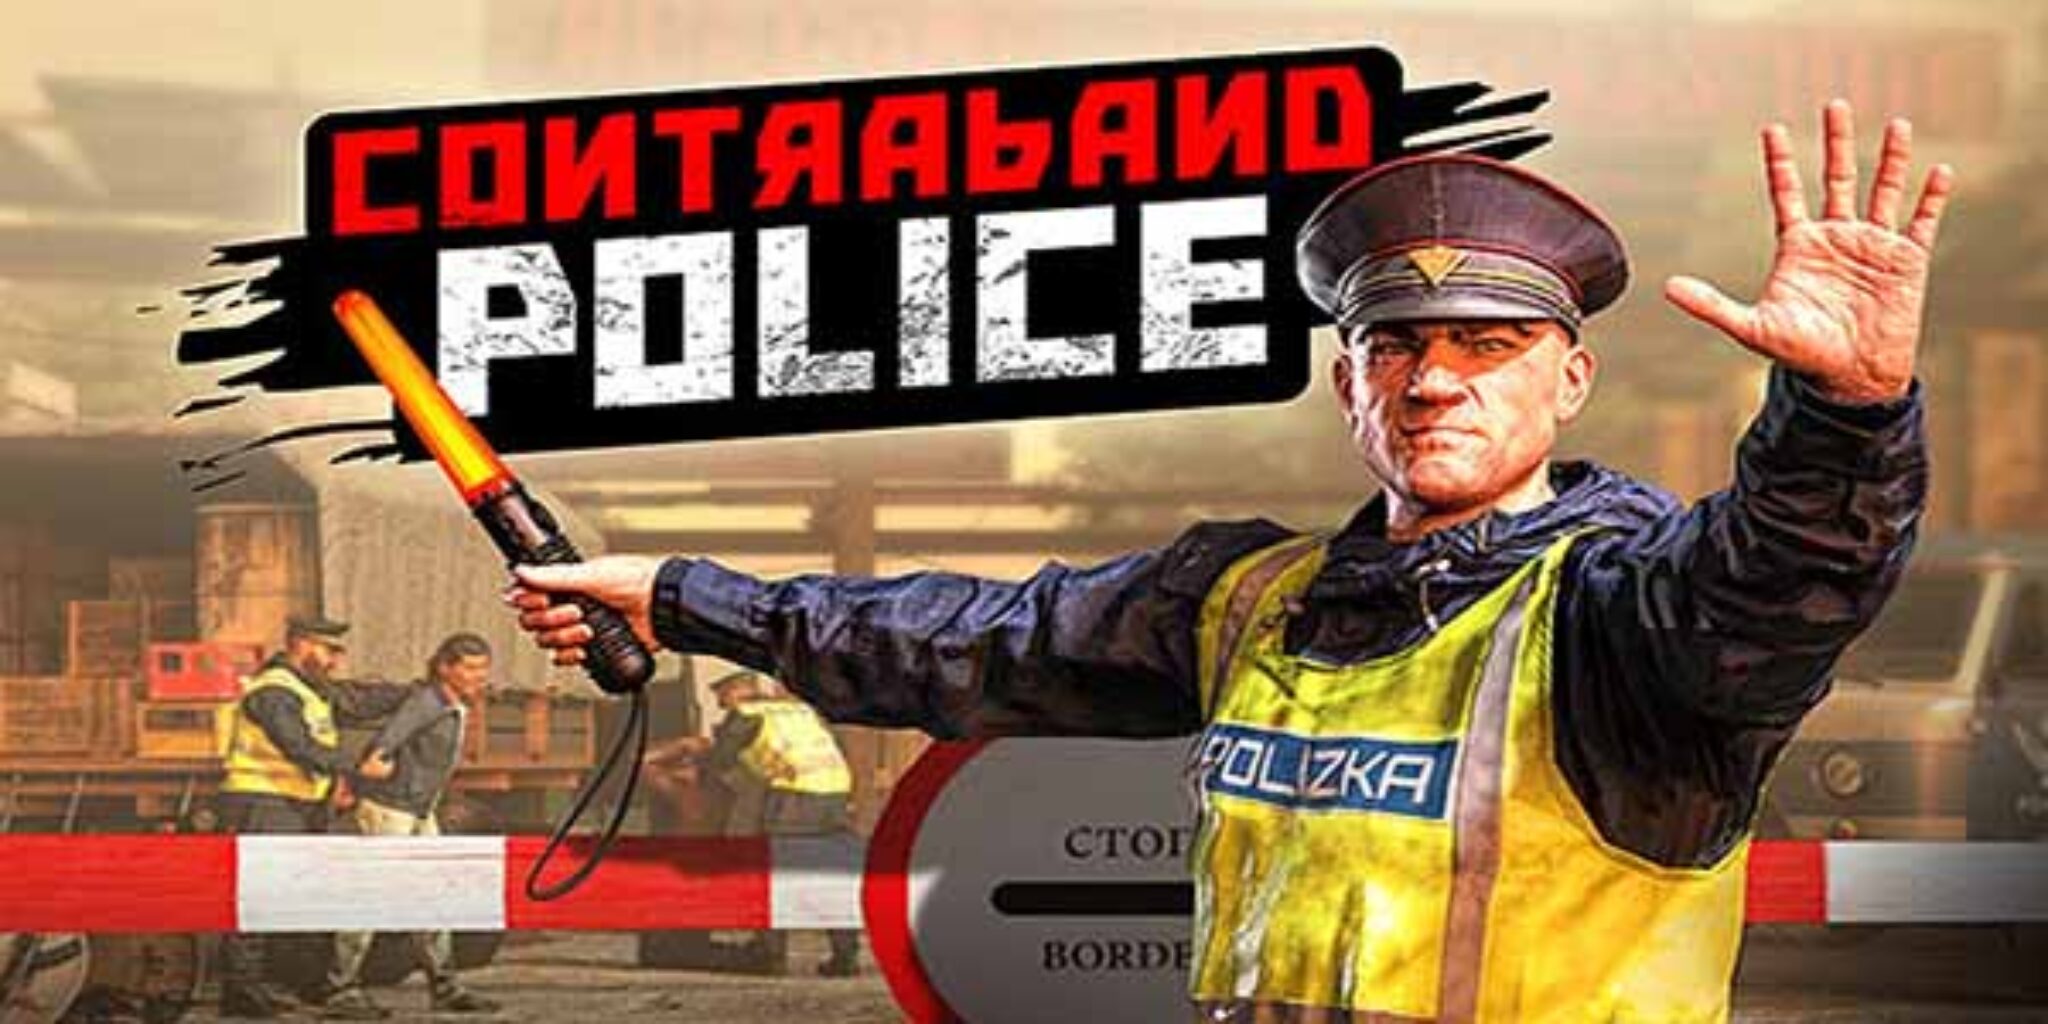 contraband police game engine